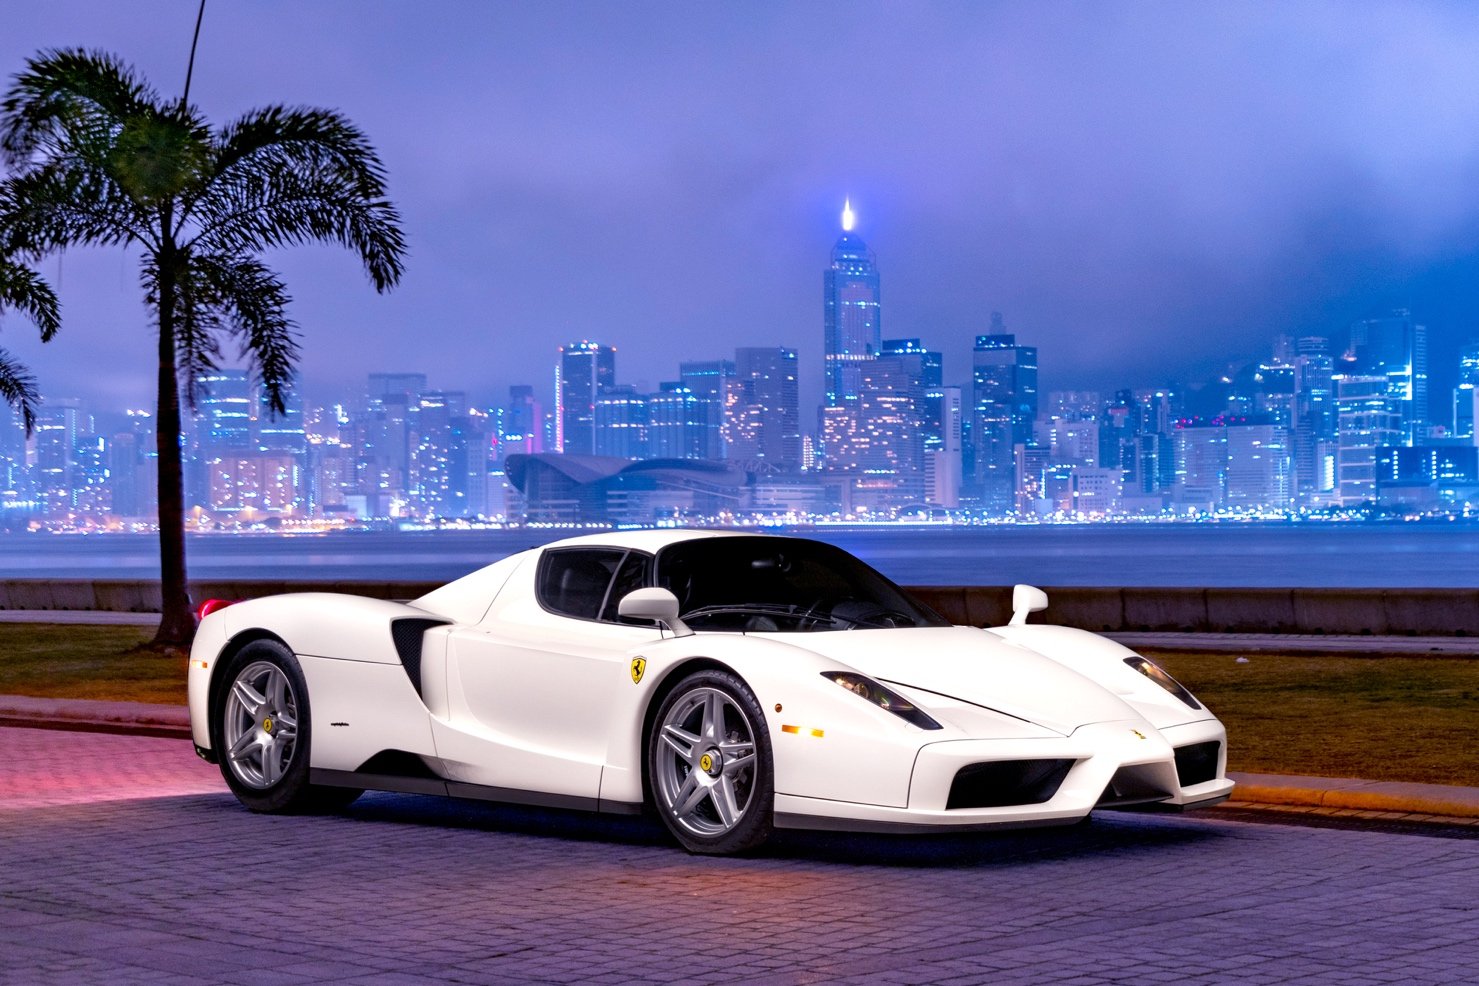 The one-off Bianco Avus Enzo will be sold by RM Sotheby’s without reserve through a private auction